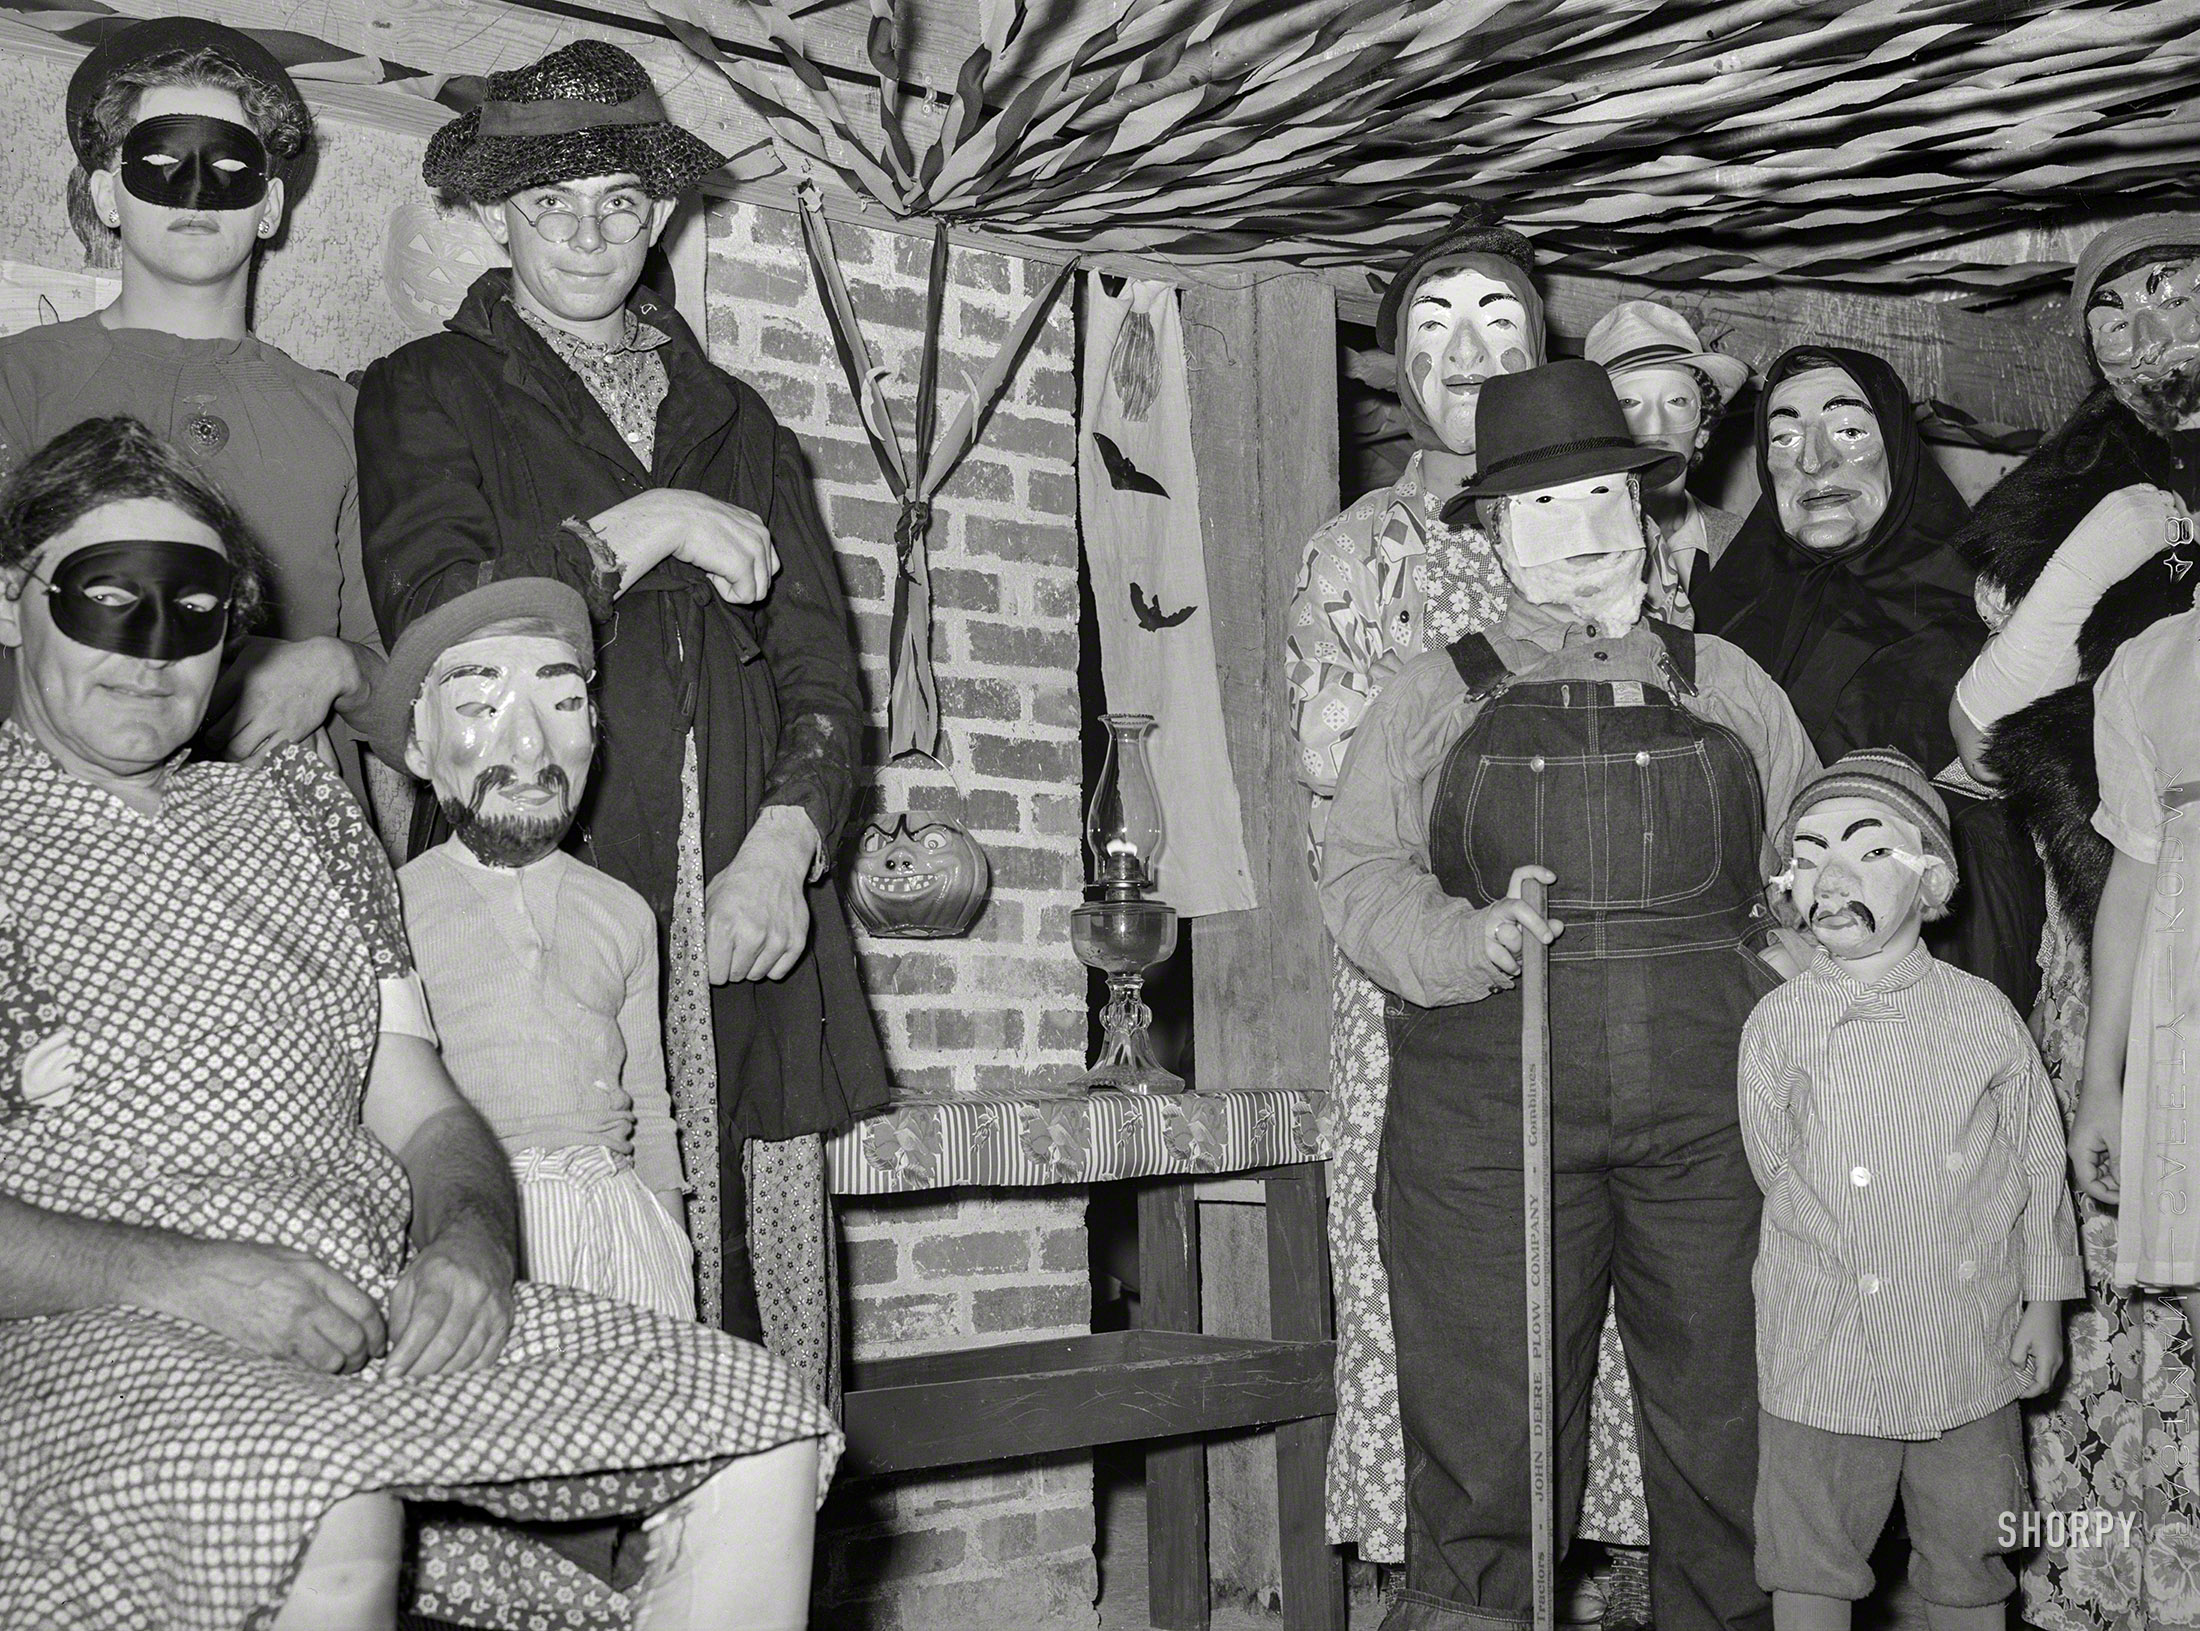 October 1939. "Masquerade at Halloween party. Hillview cooperative, Osage Farms, Missouri." Acetate negative by Arthur Rothstein. View full size.